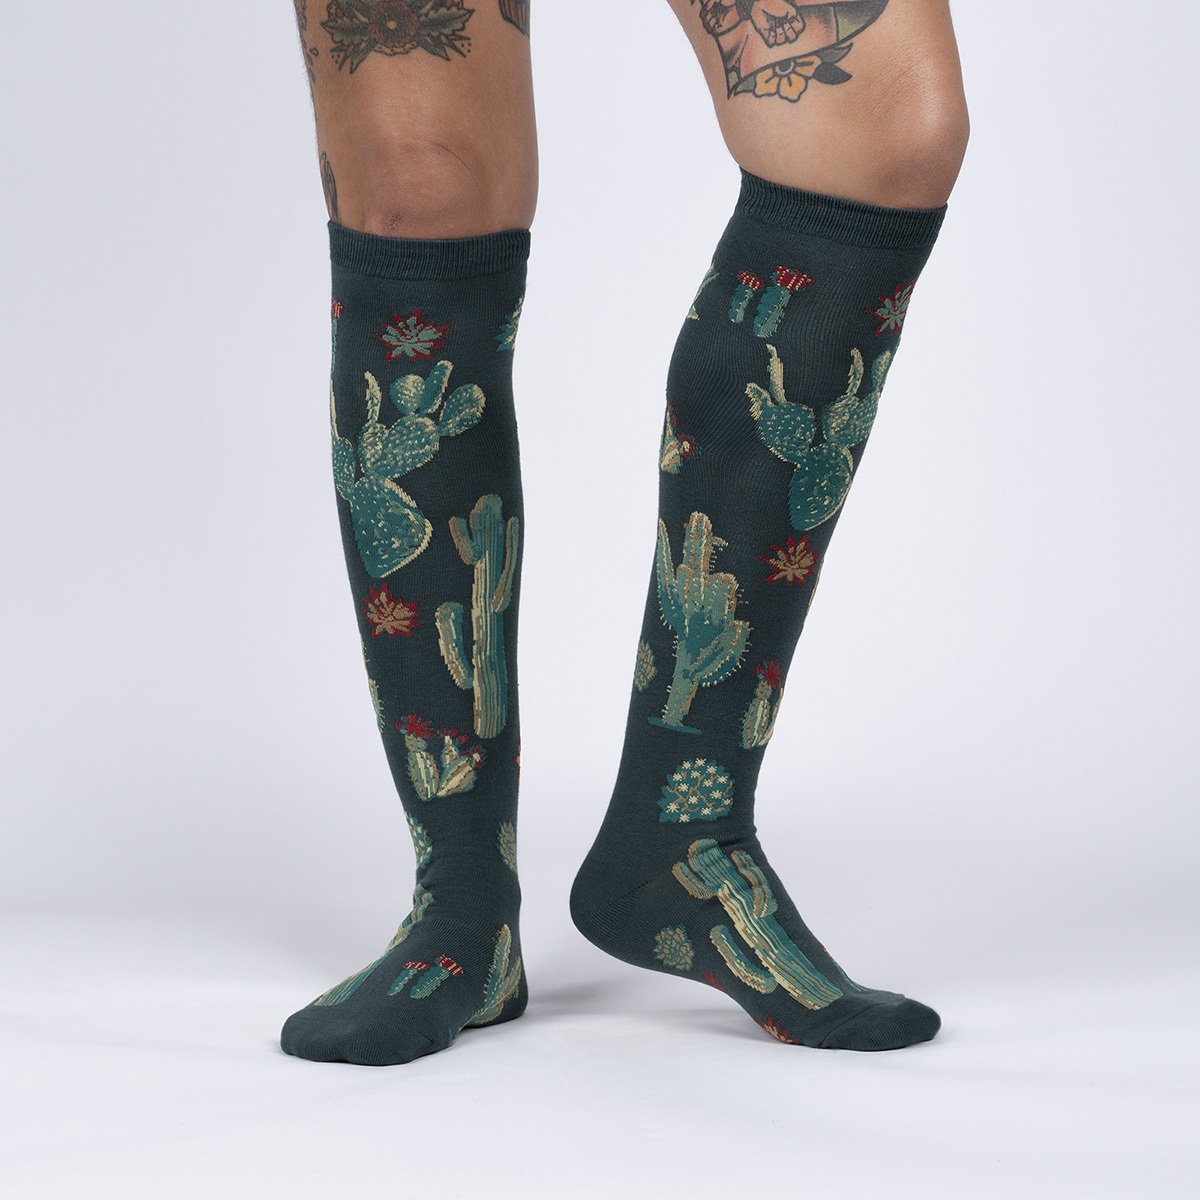 A person wearing green knee high socks with cacti all over, front view - The Sockery